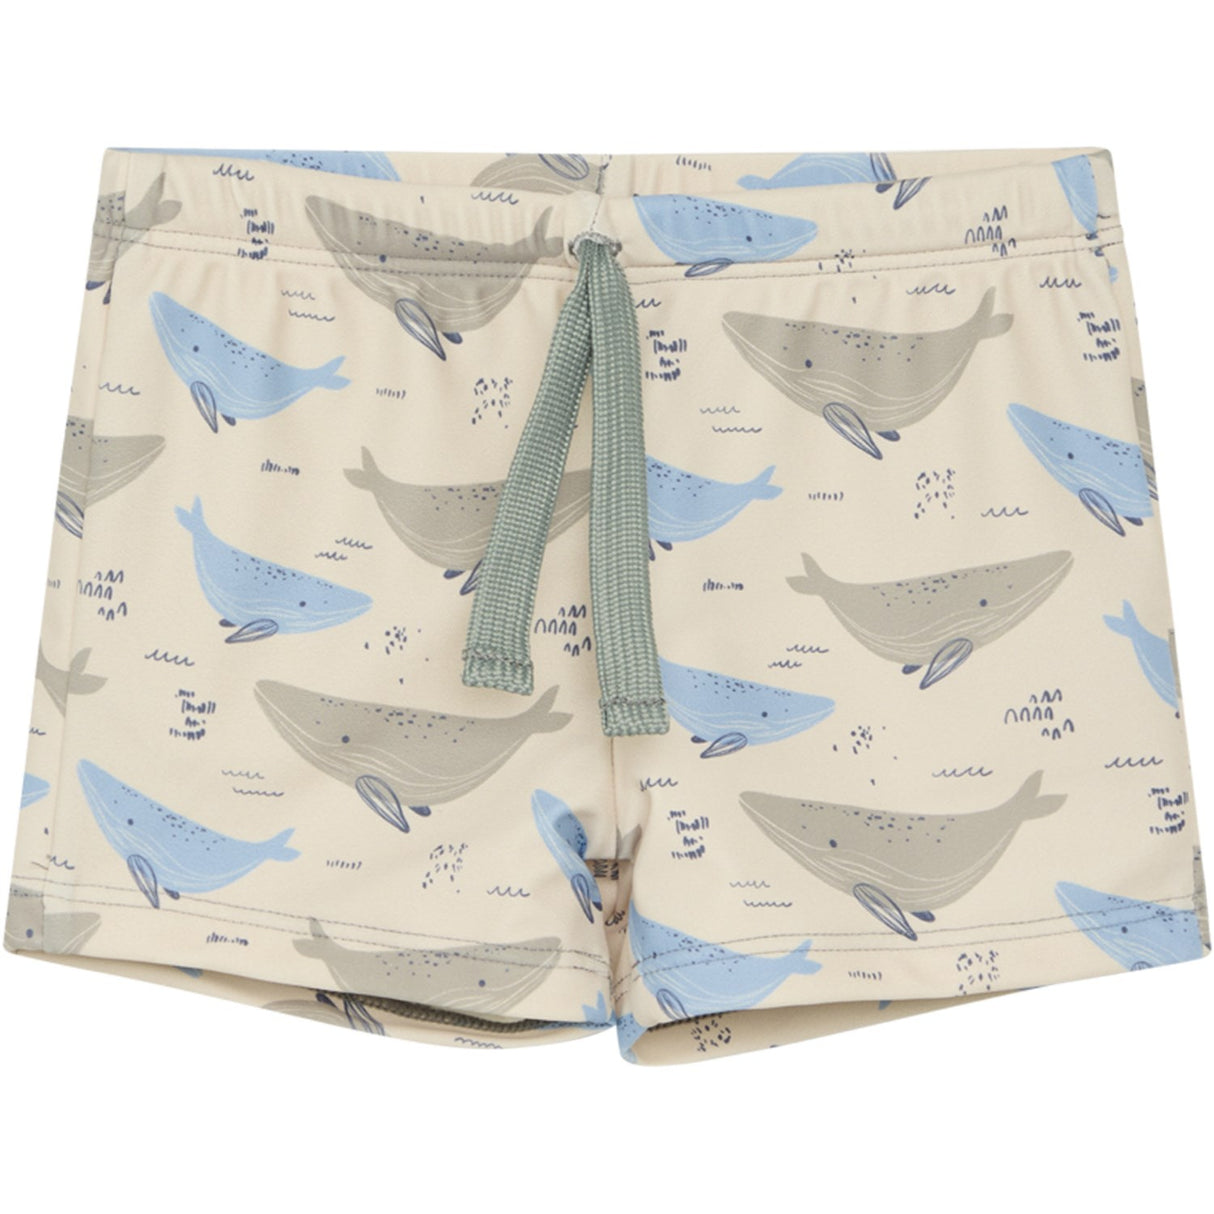 Hust & Claire French oak Haki Swimming Trunks